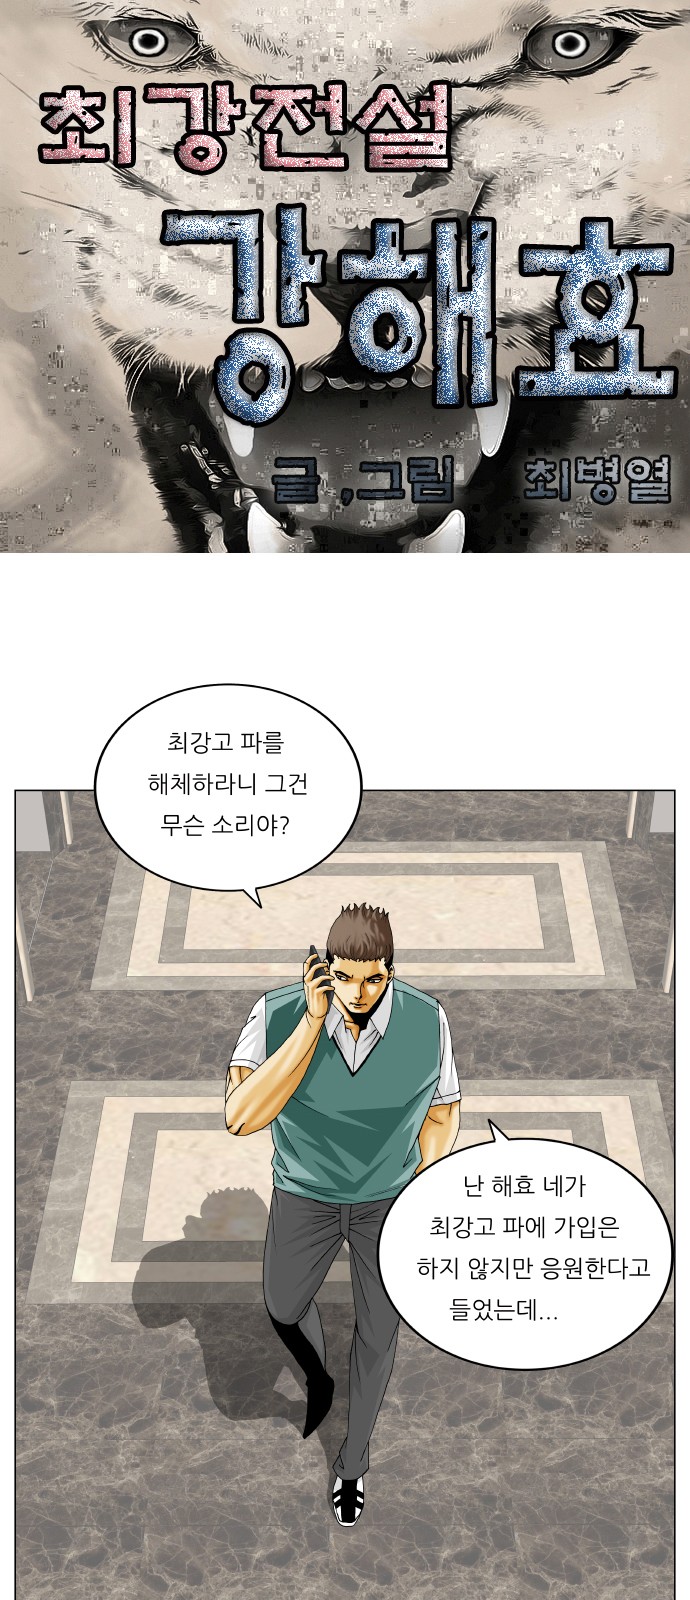 Ultimate Legend - Kang Hae Hyo - Chapter 330 - Page 1